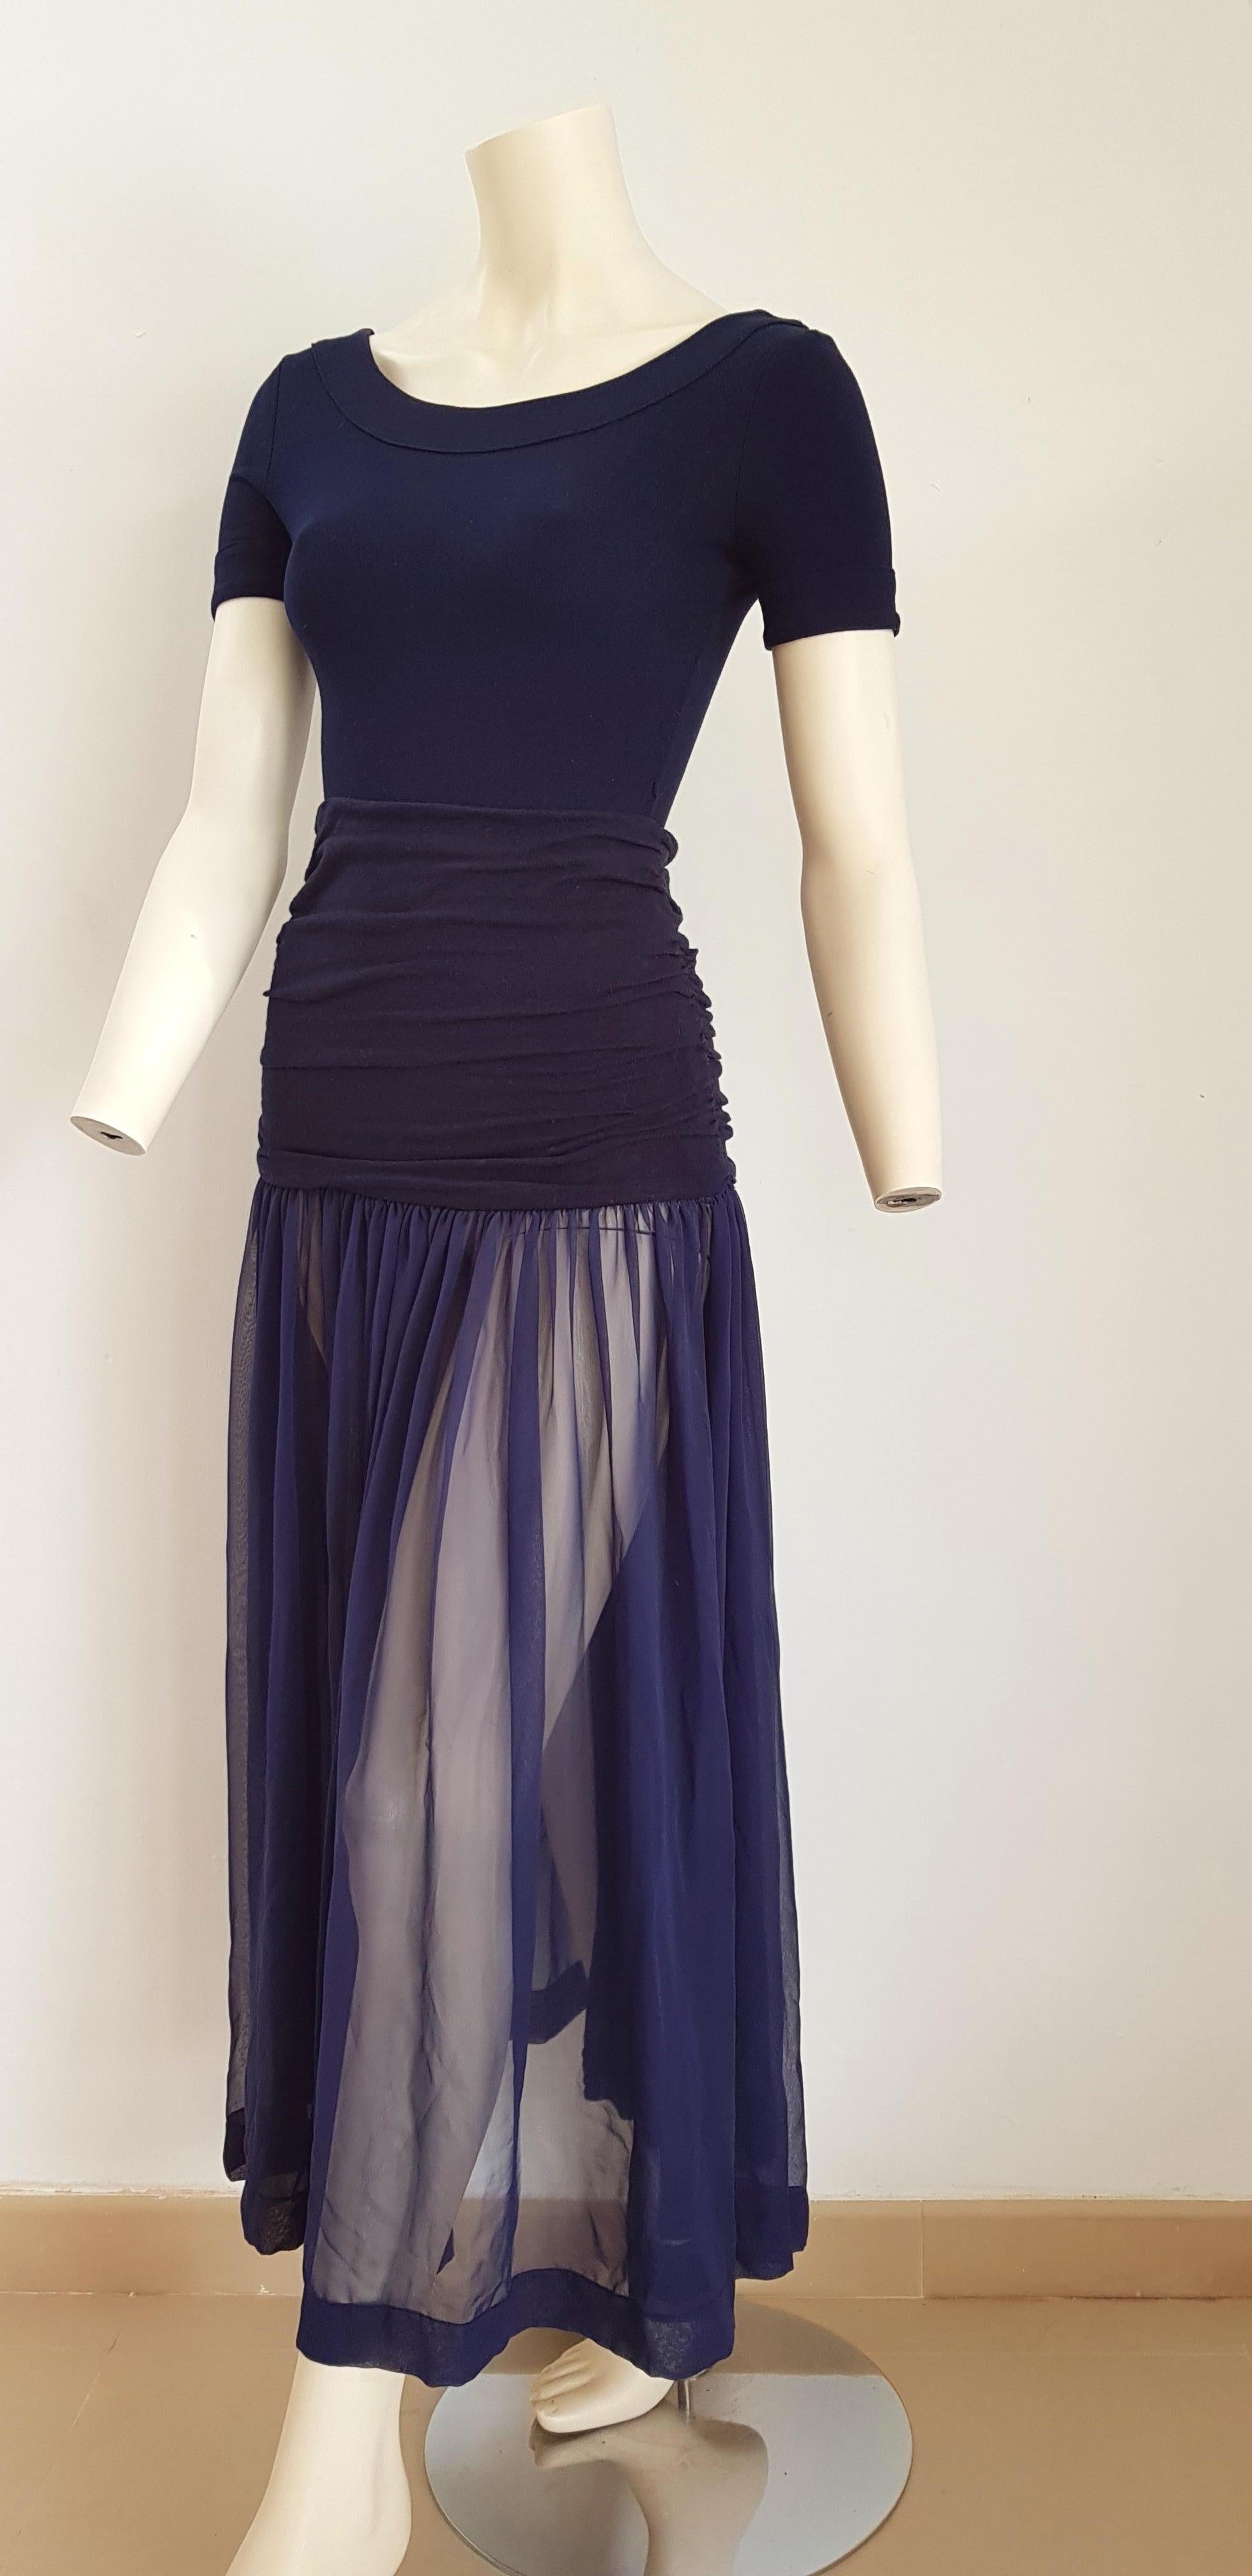 Isabelle ALLARD Paris, body, chiffon skirt, pleated black waistband, blue silk cotton Dress. Created in the Couture atelier of the Rue Saint Honoré Paris - Unworn, New.

Isabelle ALLARD is a Paris brand that created only haute couture and selling to